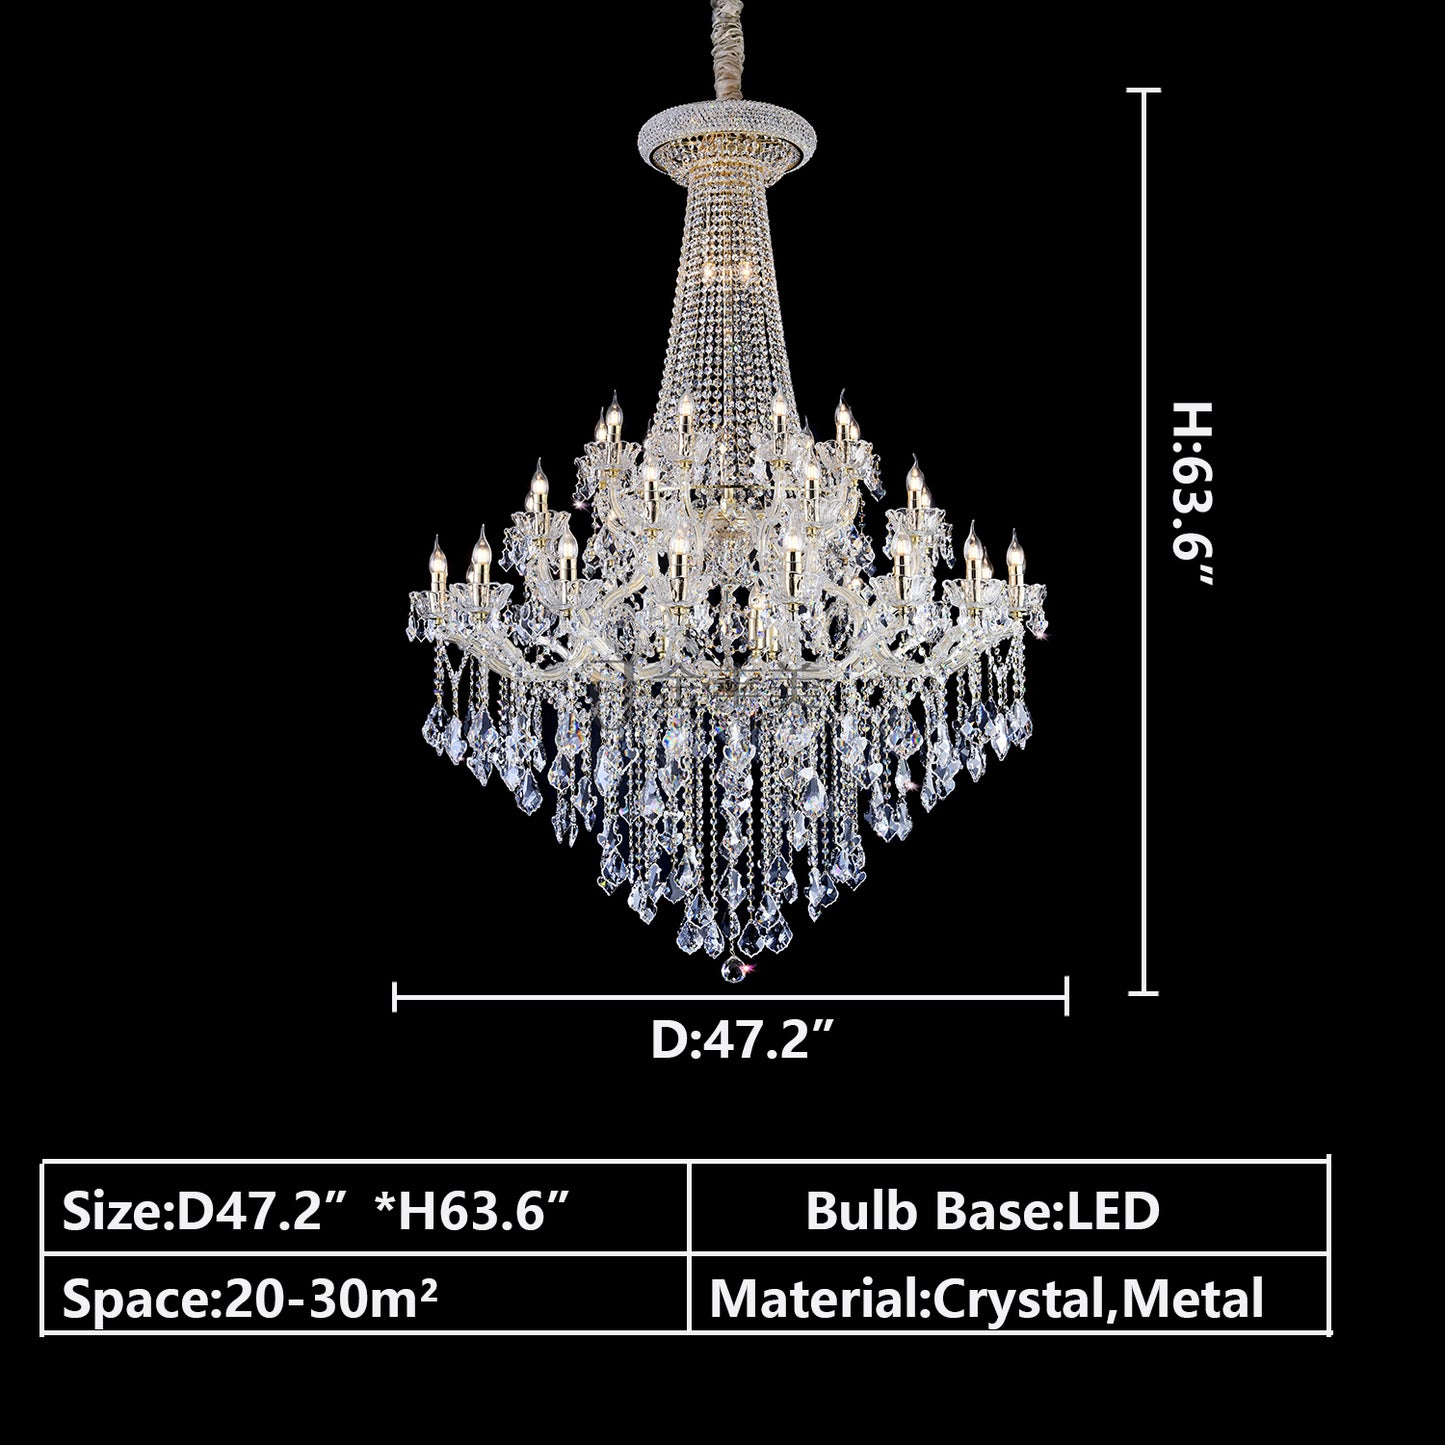 D47.2"*H63.6" chandelier,chandeliers,pendant,crystal,metal,clear crystal,candle,branch,round,raindrop,teardrop,extra large,oversized,large,huge,big,round,living room,luxury,dining room,modern,foyer,stairs,hallway,entrys,hotel lobby,duplex hall,loft